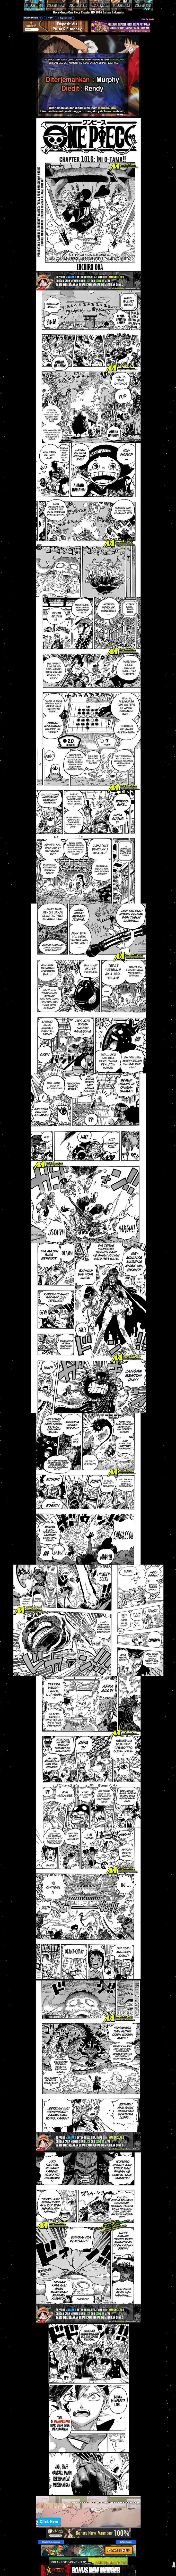 One Piece Chapter 1016 Hq - 35